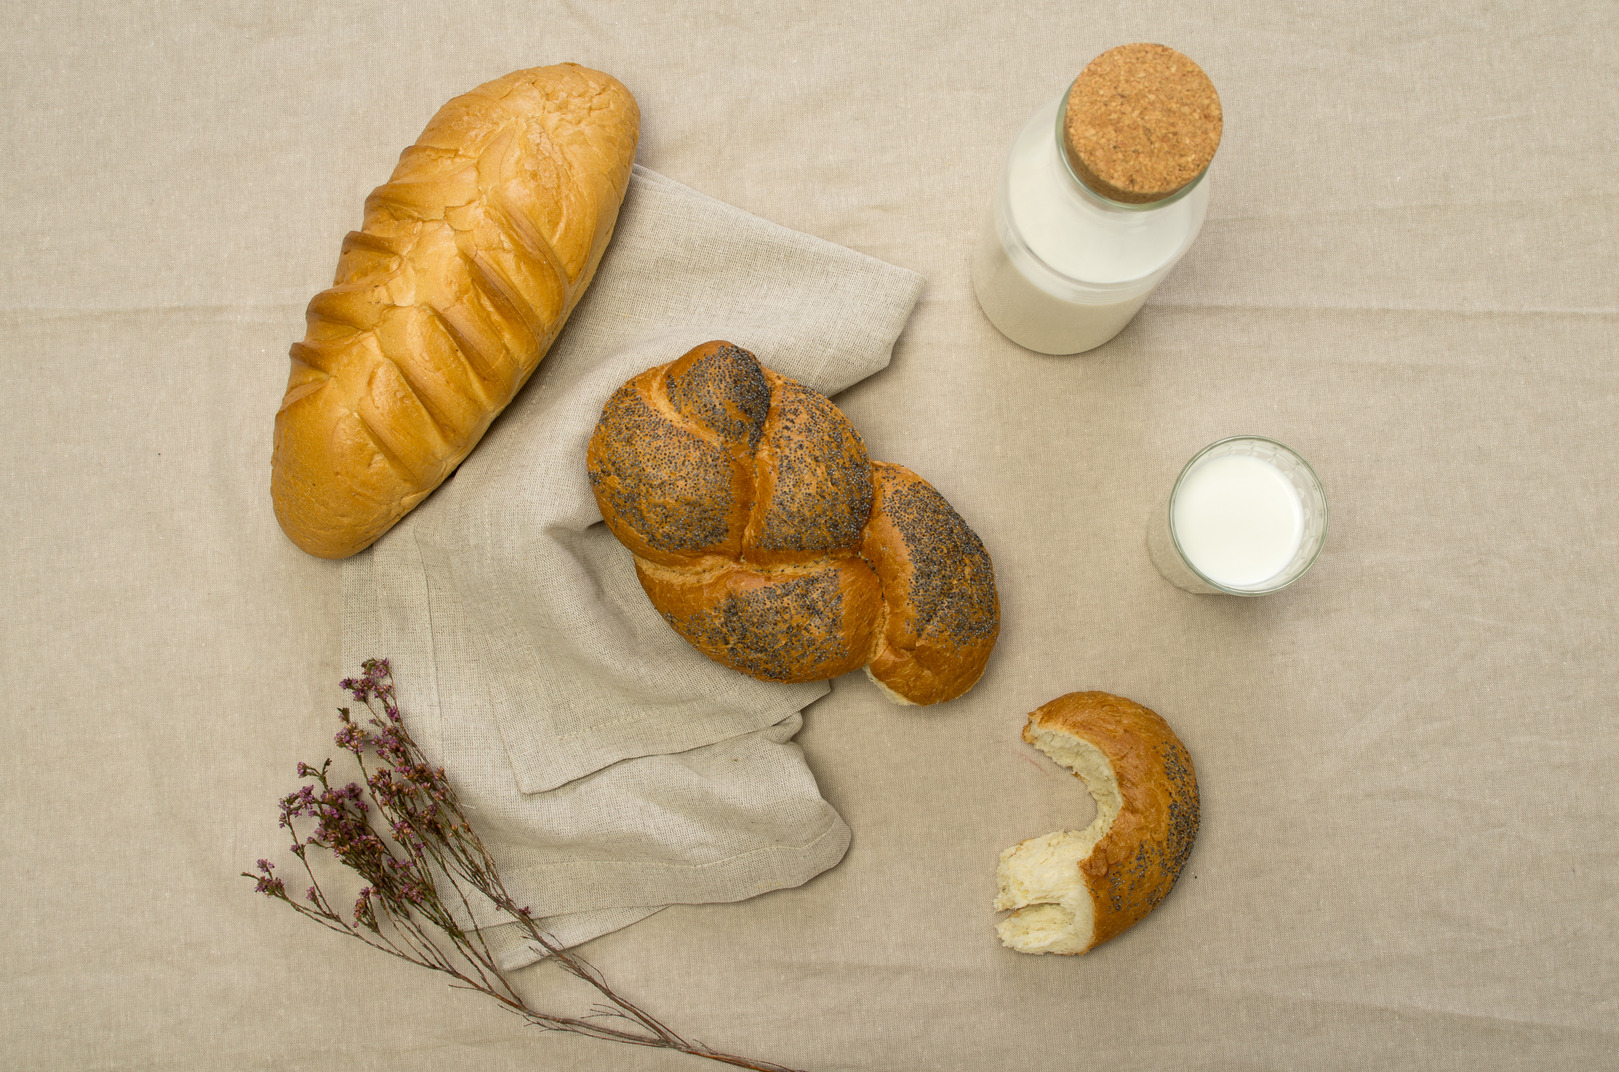 What can be better than a piece of a fresh bread with some milk?